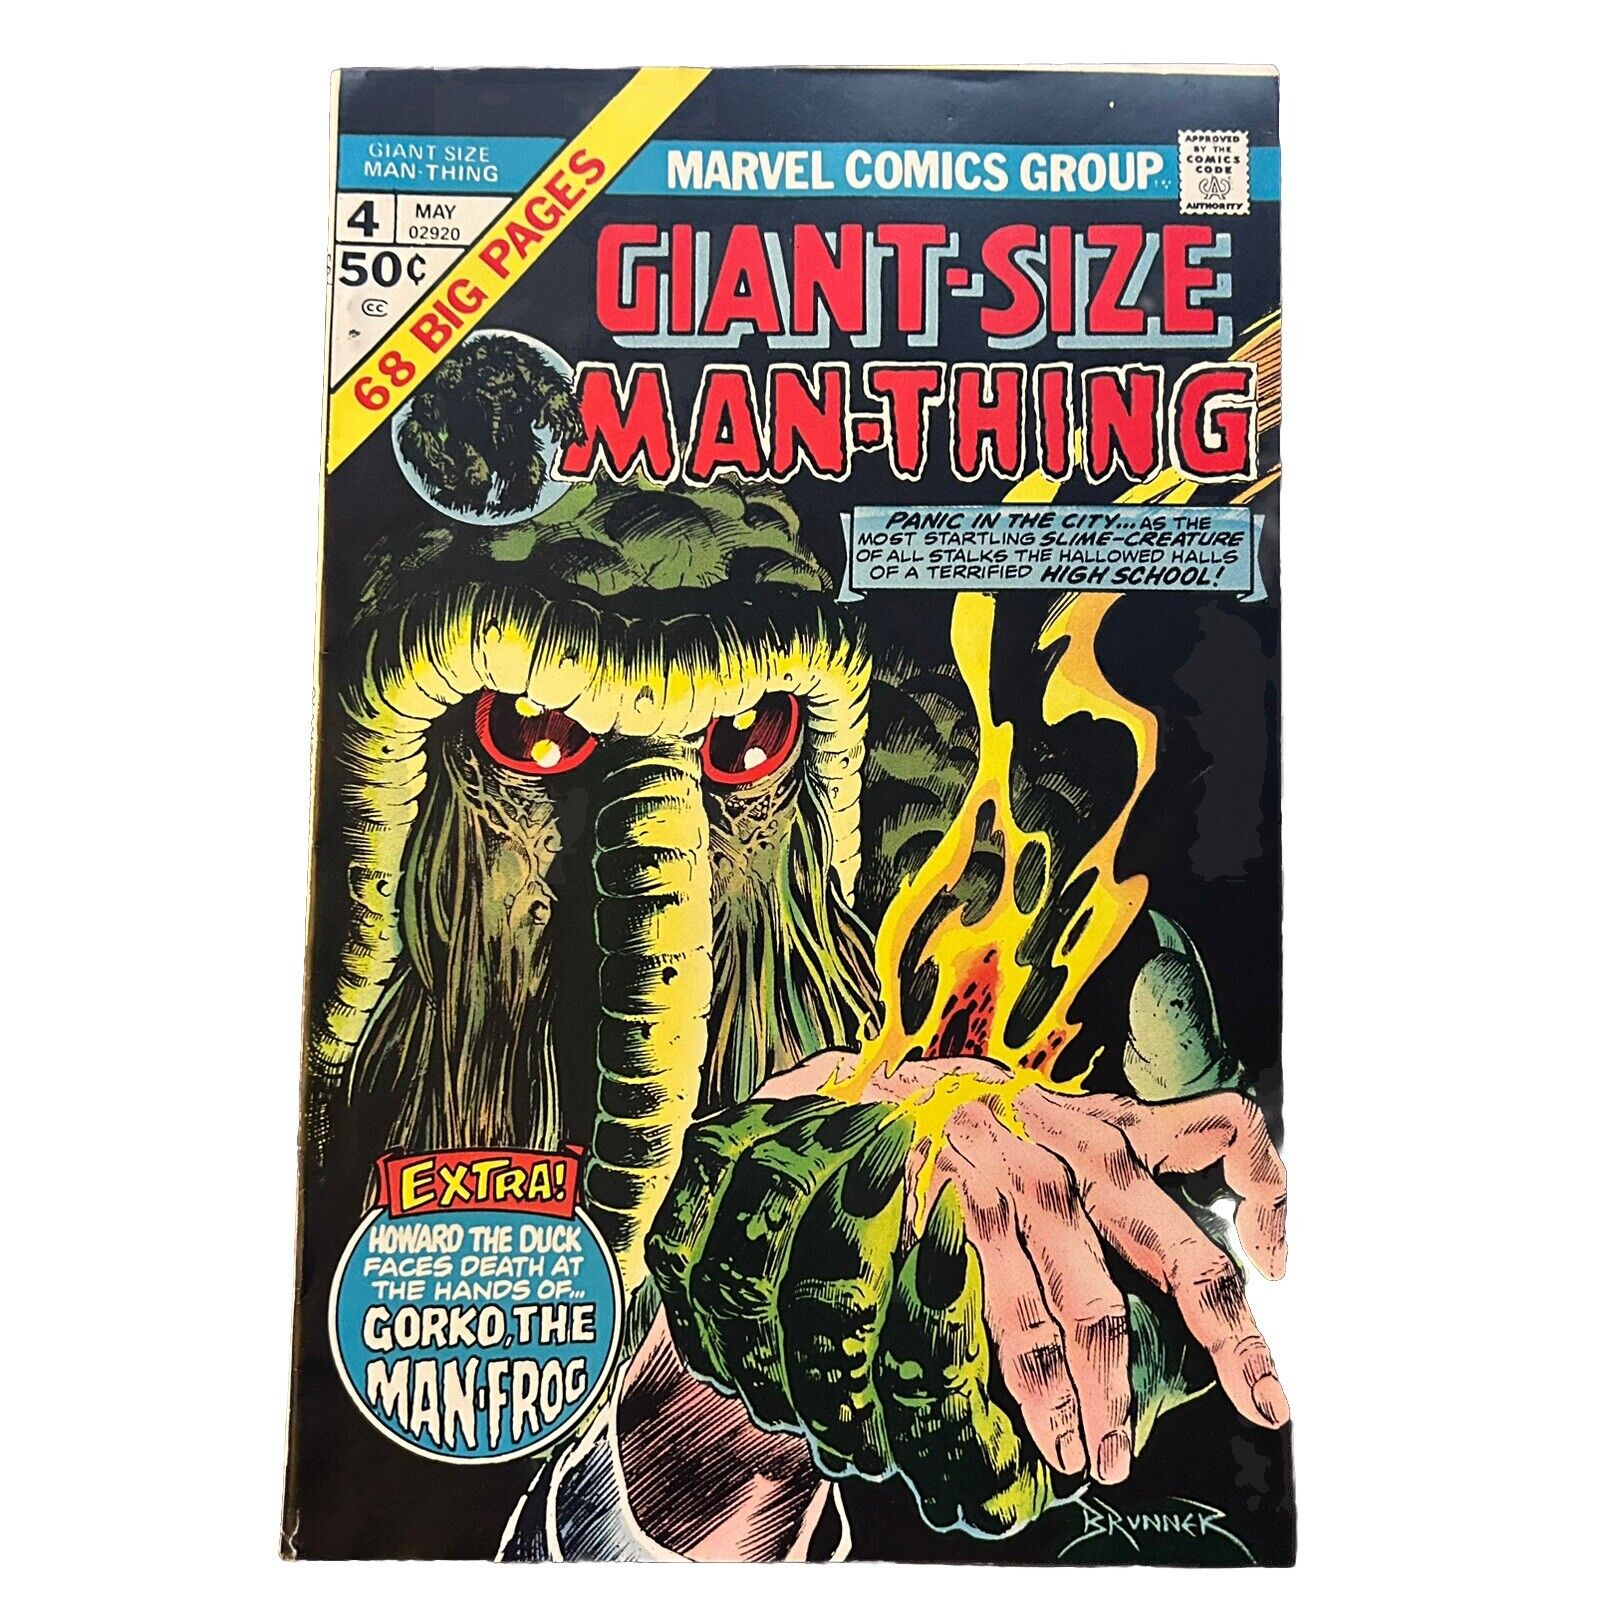 Giant-Size Man-Thing No. 4 May 1975 Marvel - Brunner Cover - VF